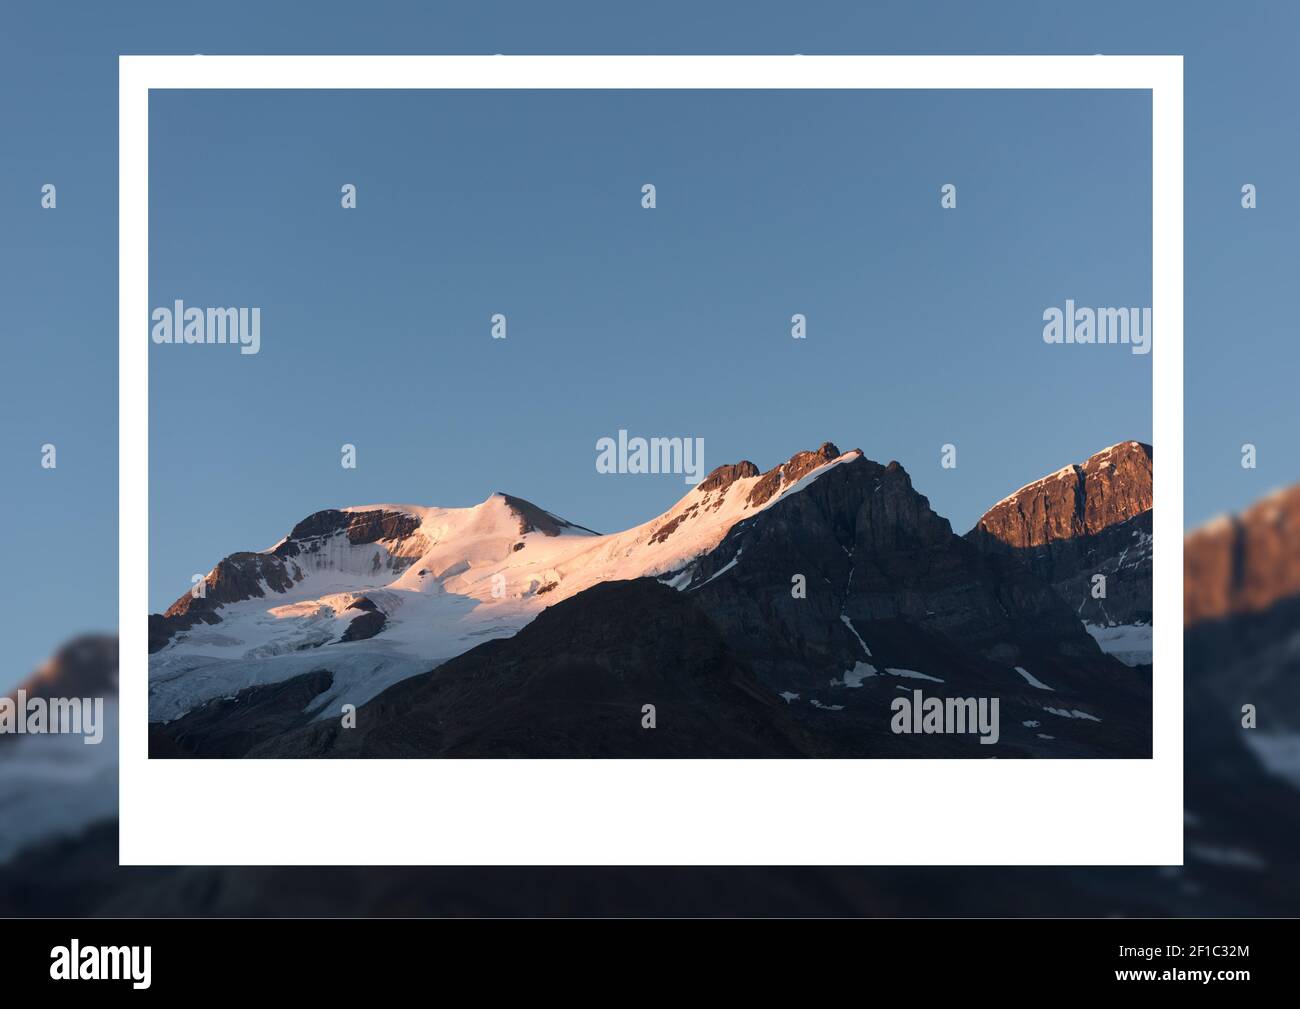 Composition of instant image white border frame over colour image of blue sky and mountain peaks Stock Photo